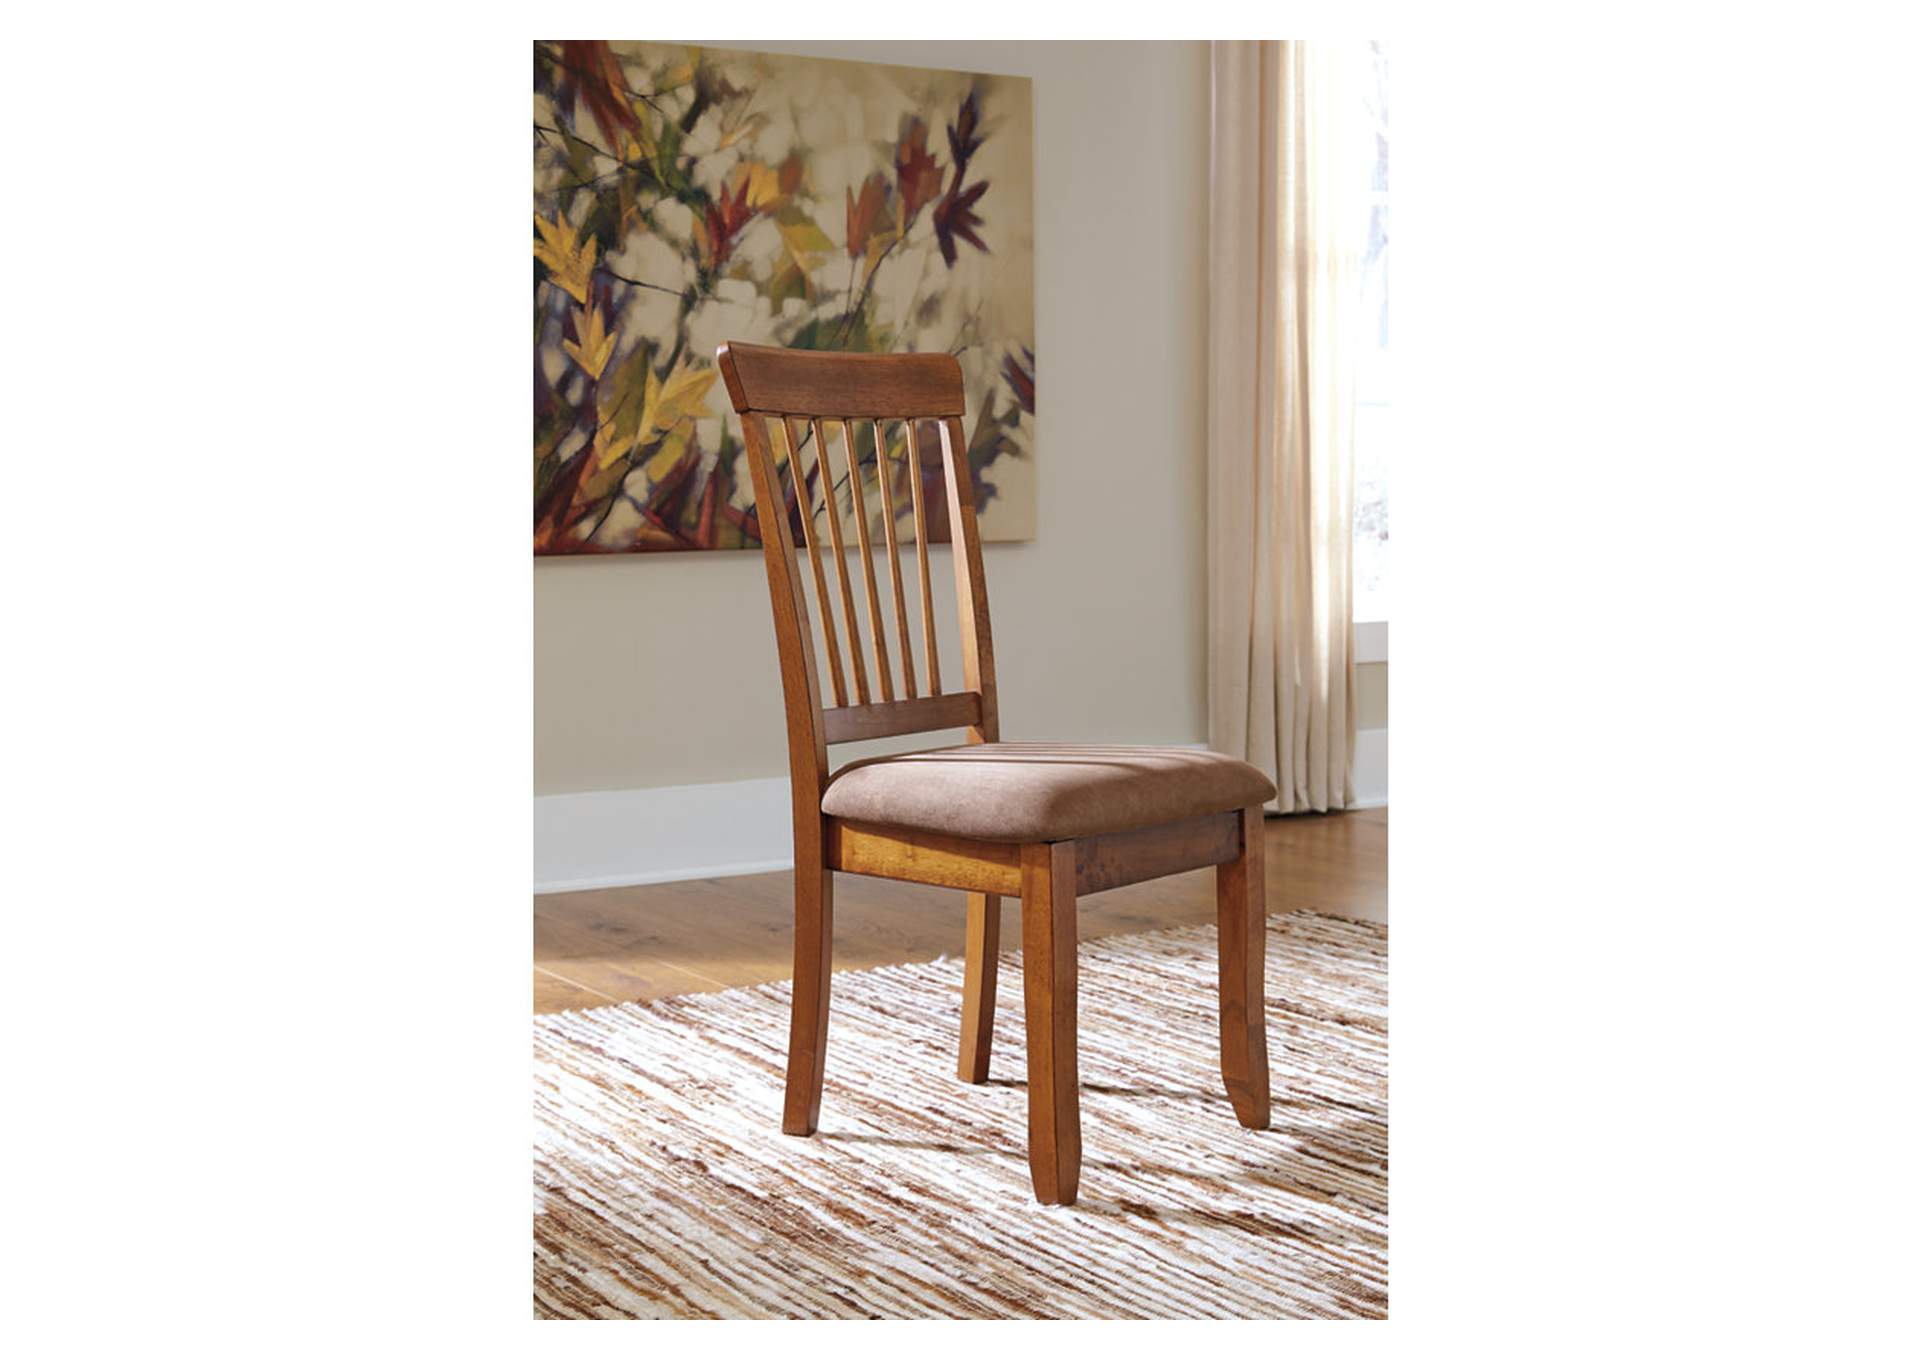 Berringer 2-Piece Dining Room Chair,Ashley